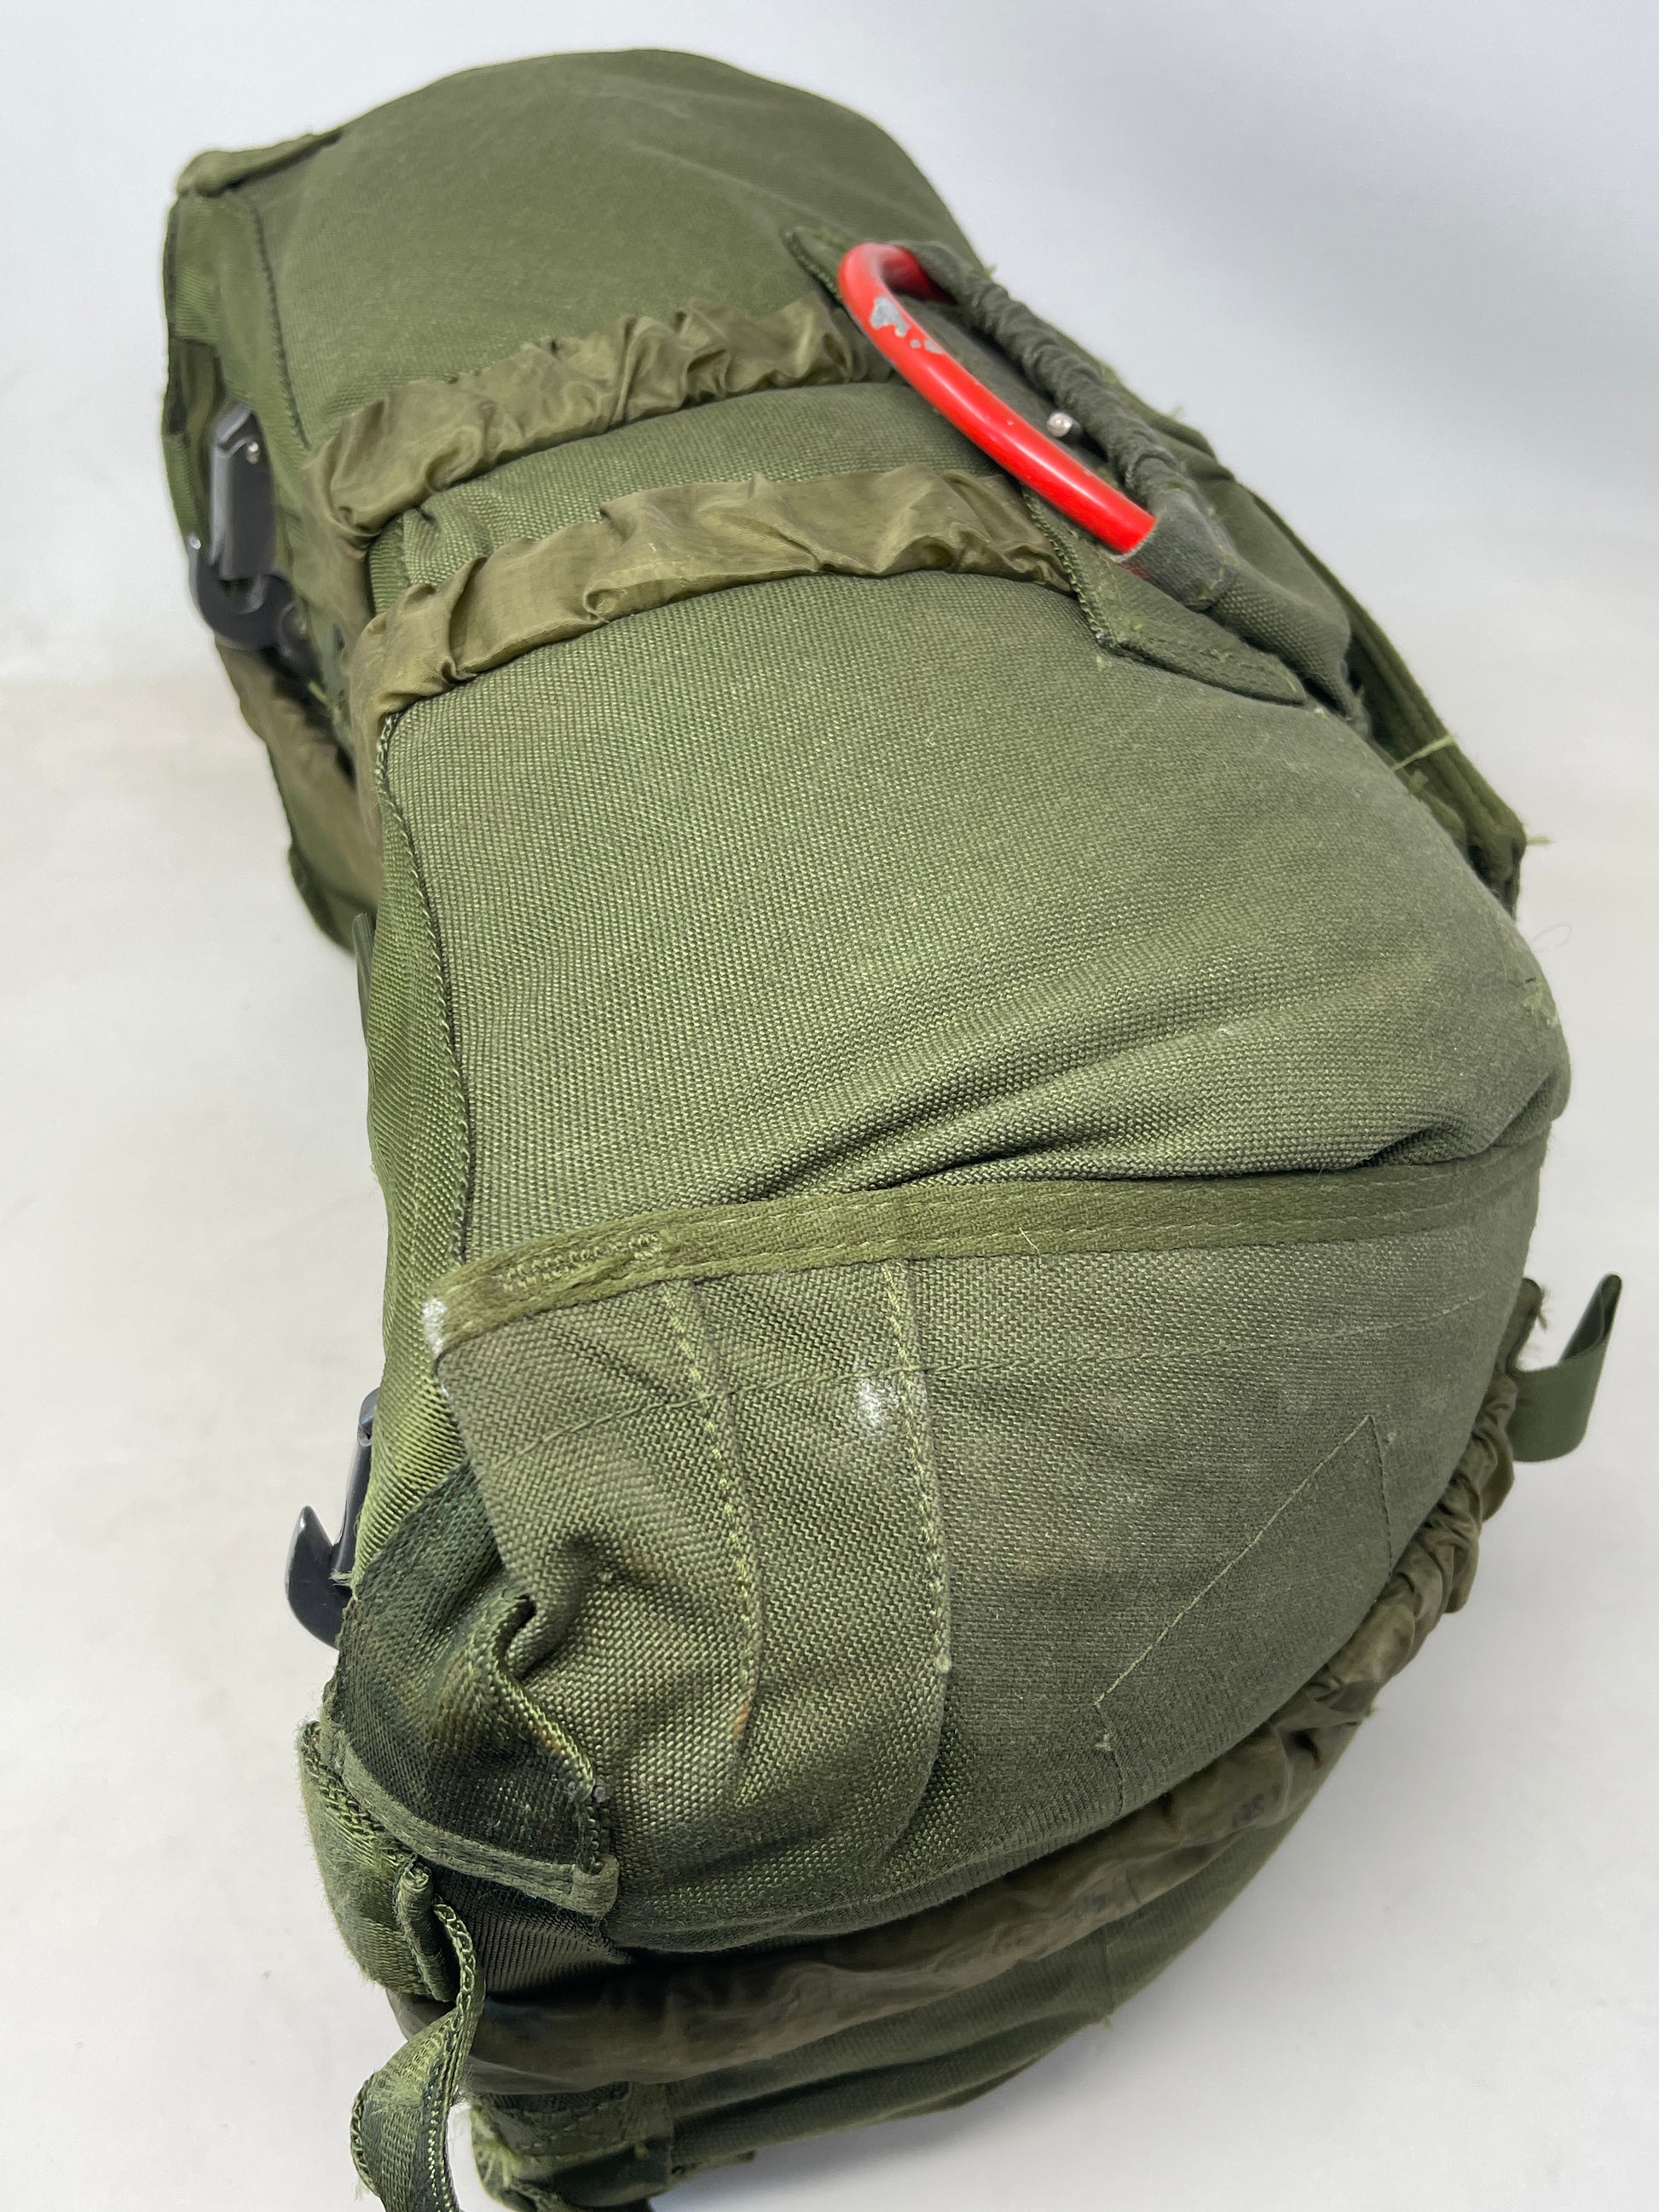 British Army Parachute Reserve Assembly Type PR7 MK2